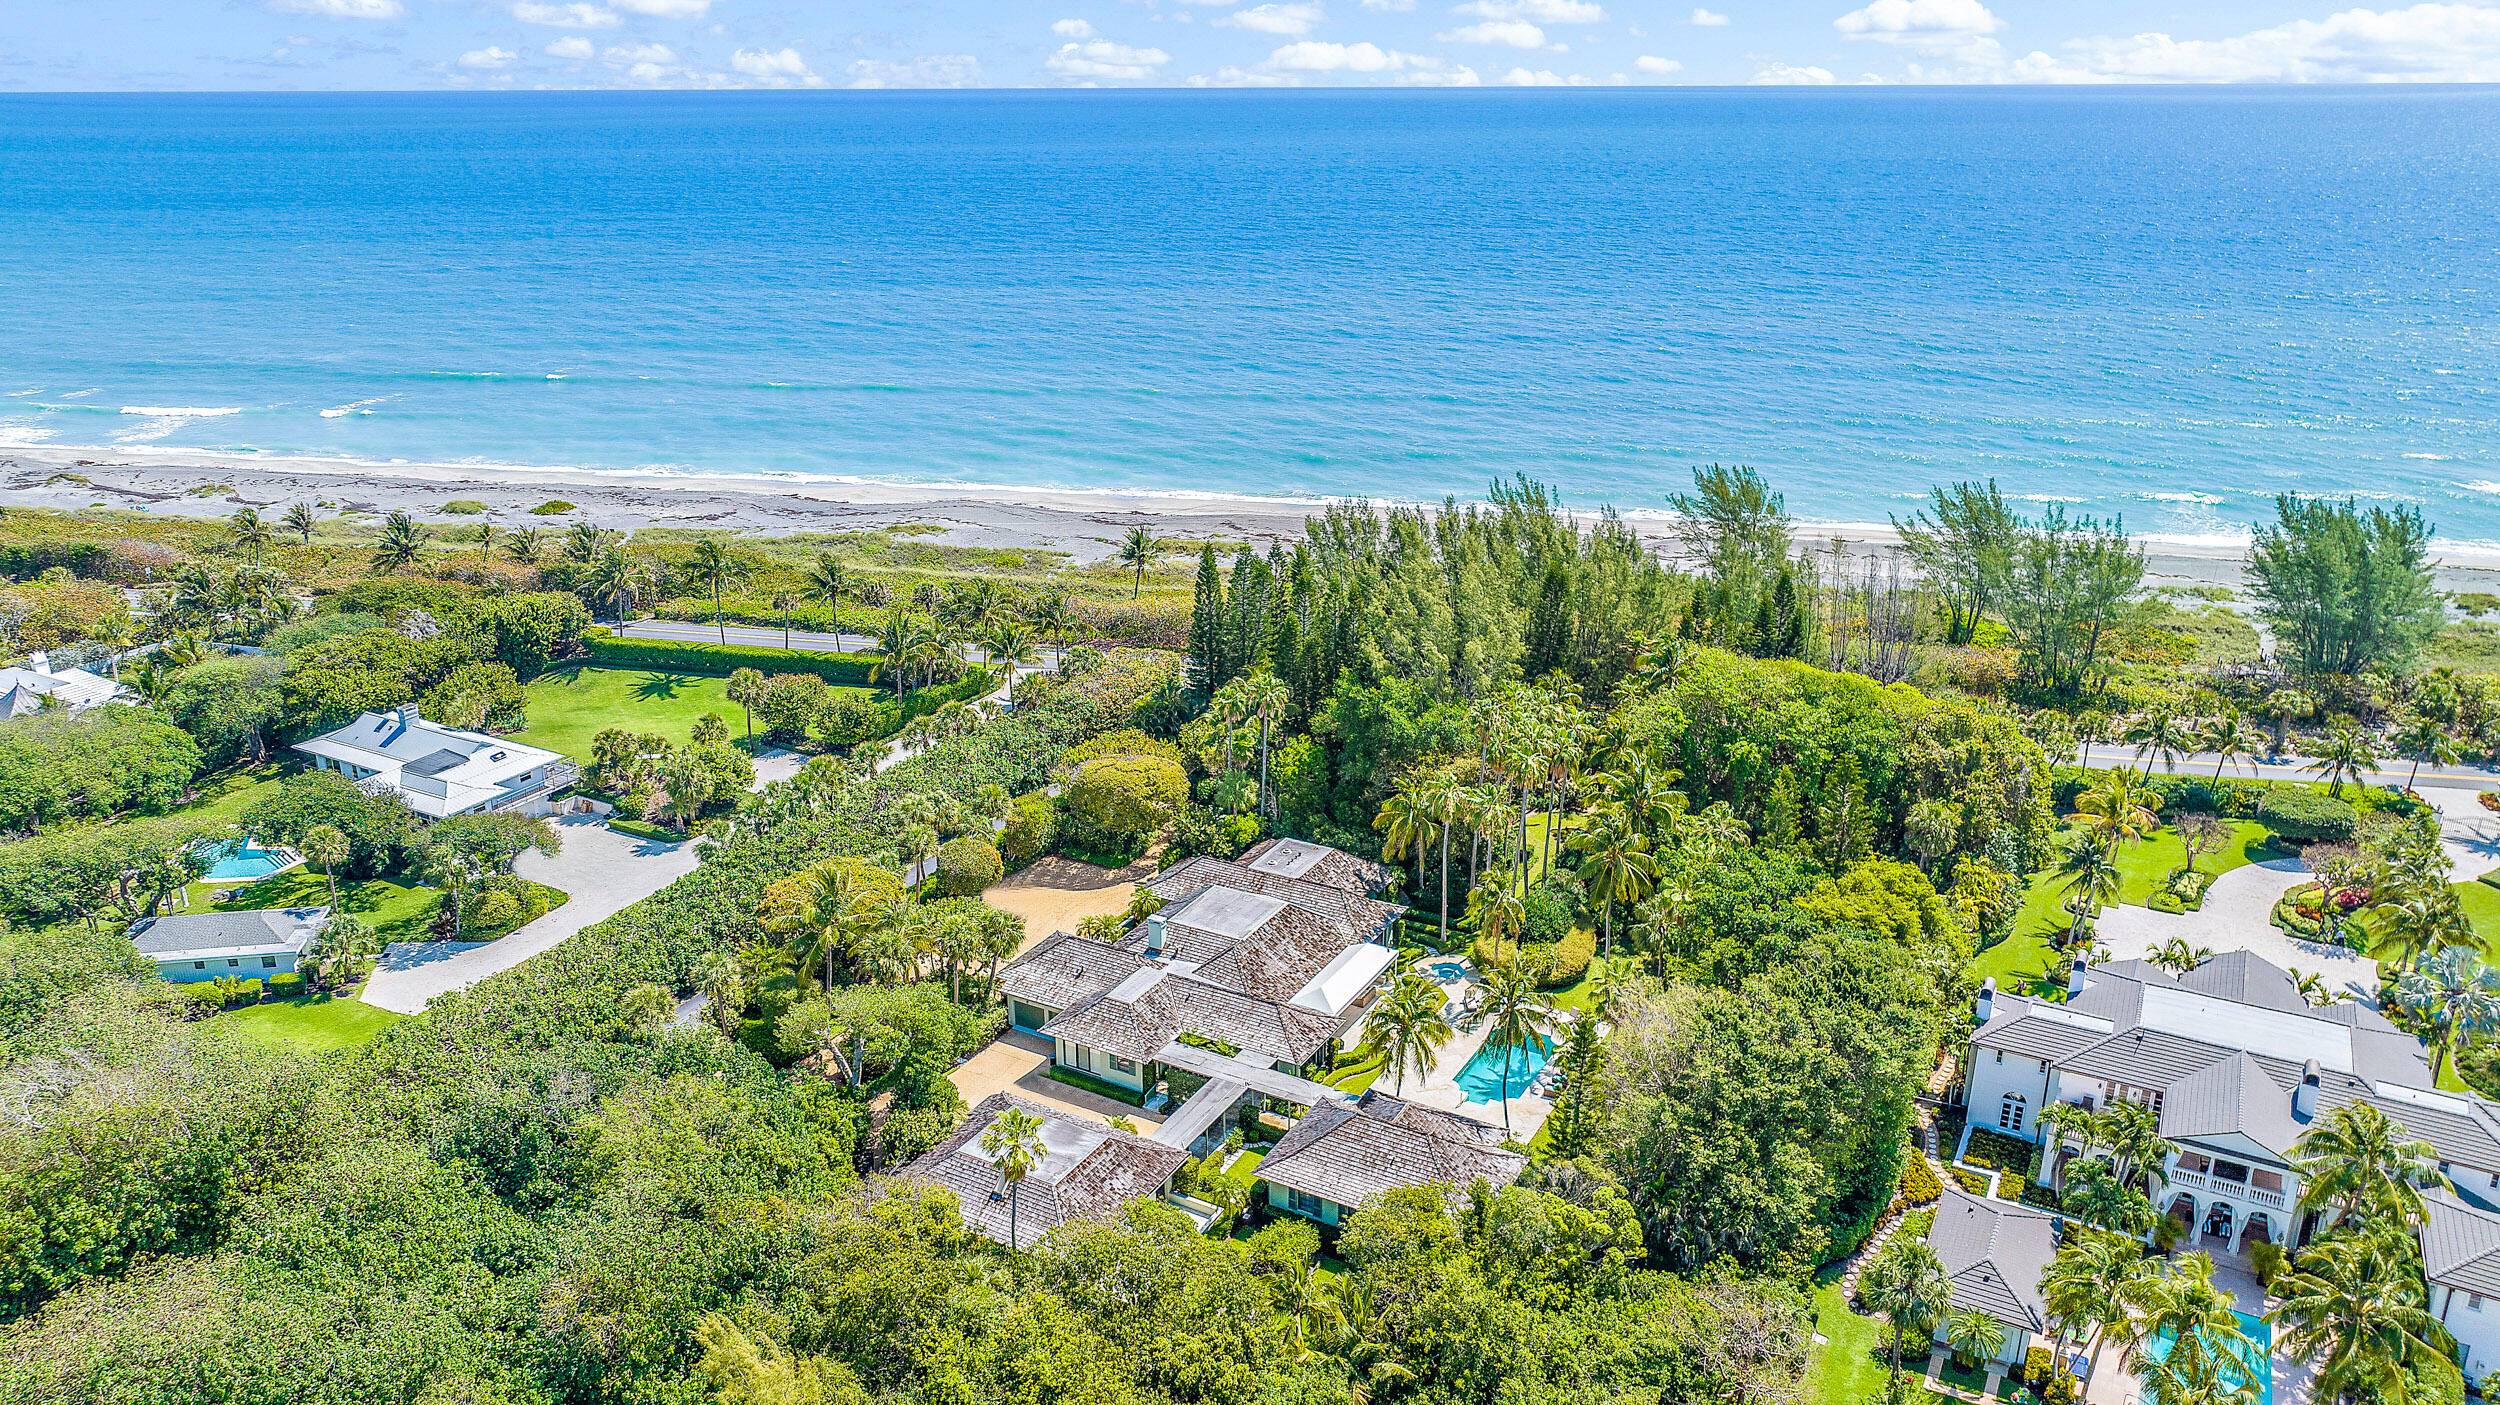 Completely private, furnished oceanfront main house with two guesthouses totaling of 6 bedrooms, each with an ensuite bathroom on 3 acres.